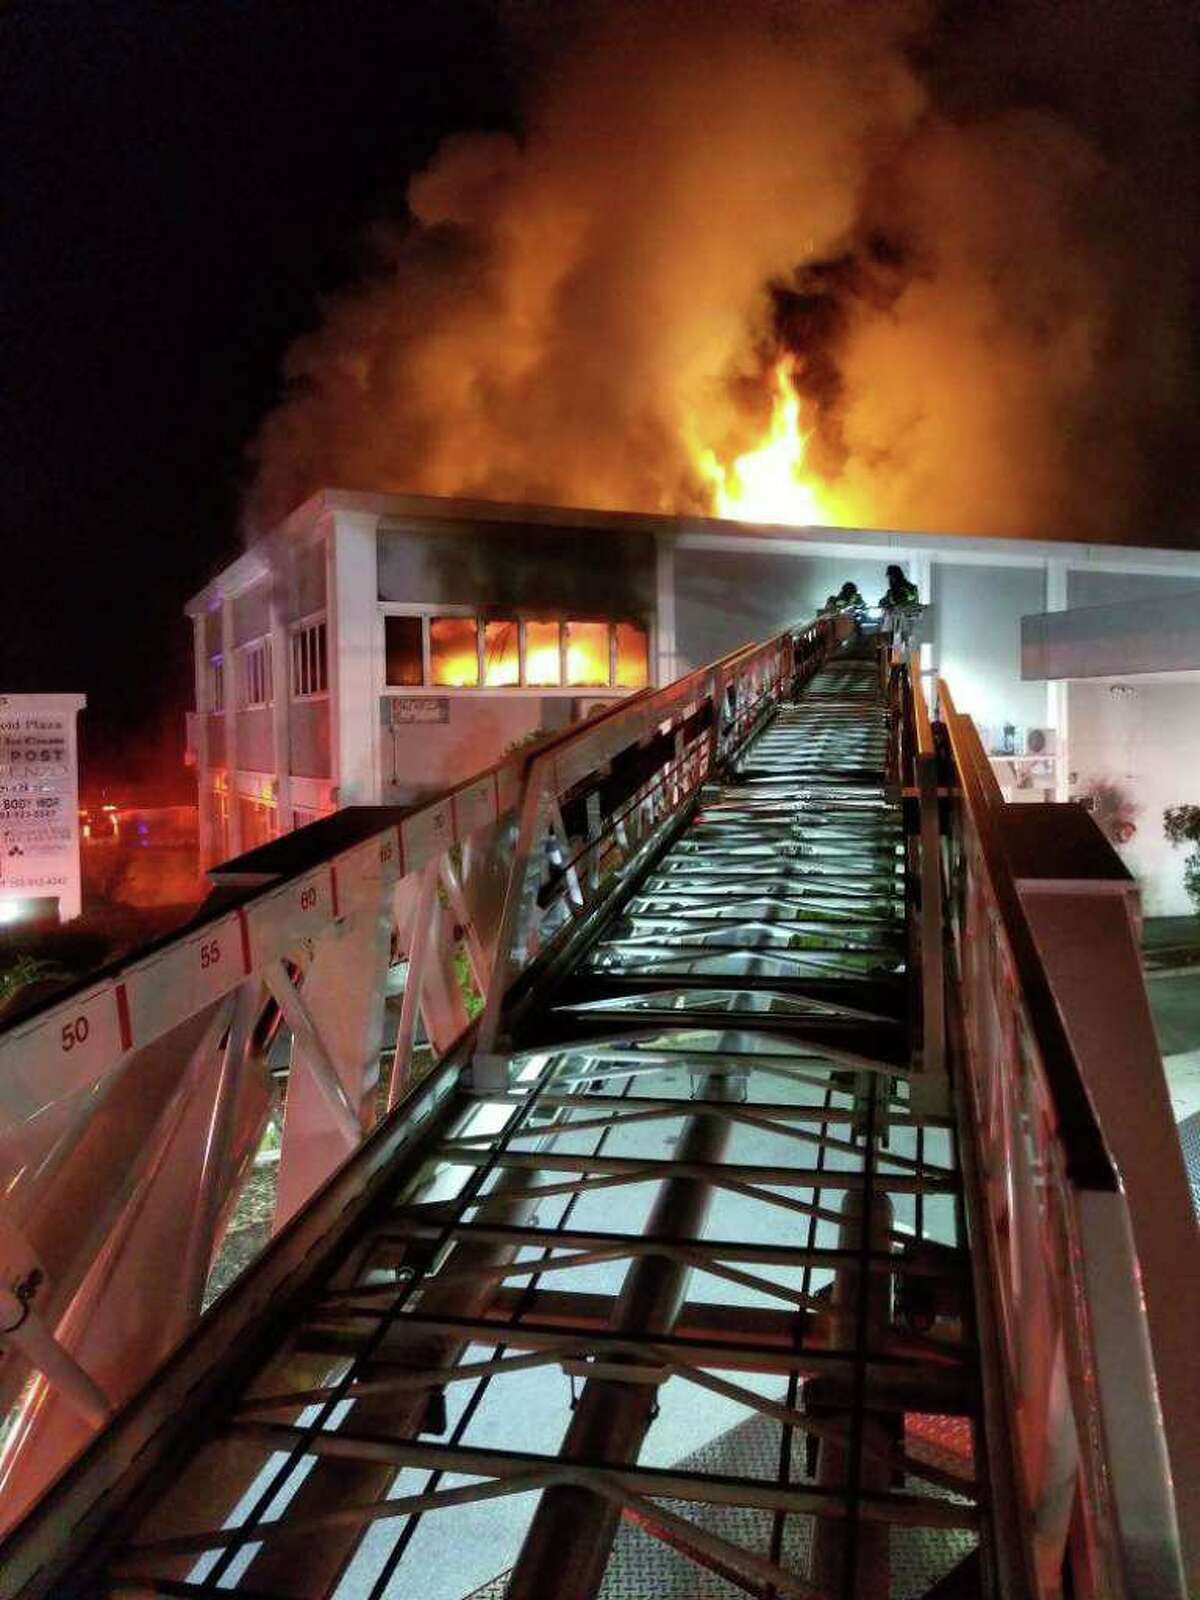 A fire heavily damaged a two-story commercial building at Indian Field Plaza on East Putnam Avenue late Monday night on Oct. 21, 2019. The fire broke out around 11 p.m. at the plaza in Cos Cob.